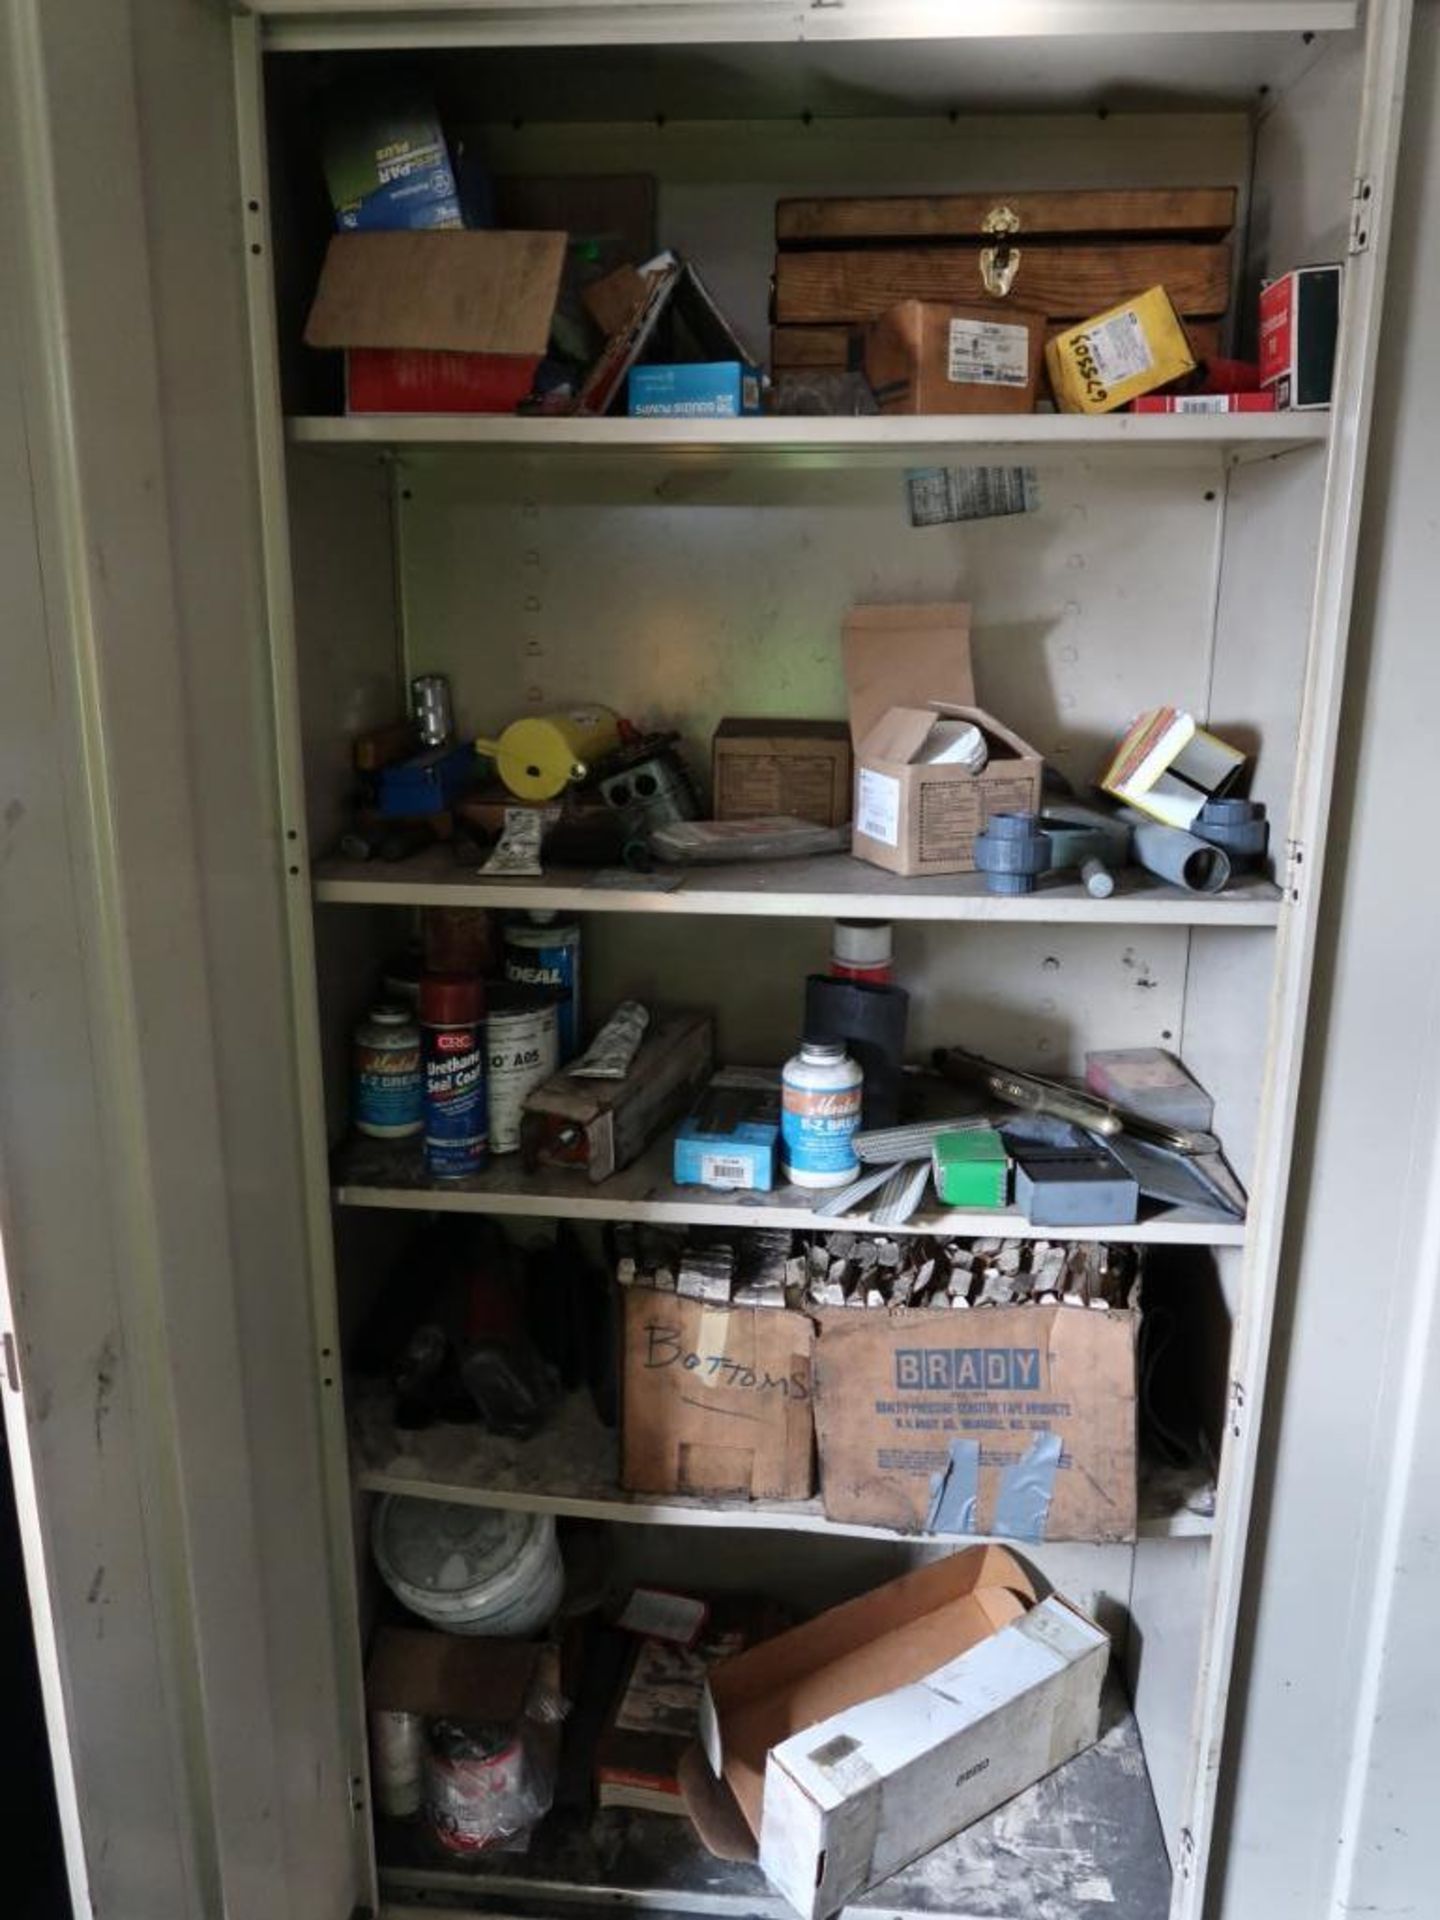 Contents of Room, Shelving, Cabinets, Electrical Supplies (go to garage) - Image 5 of 8